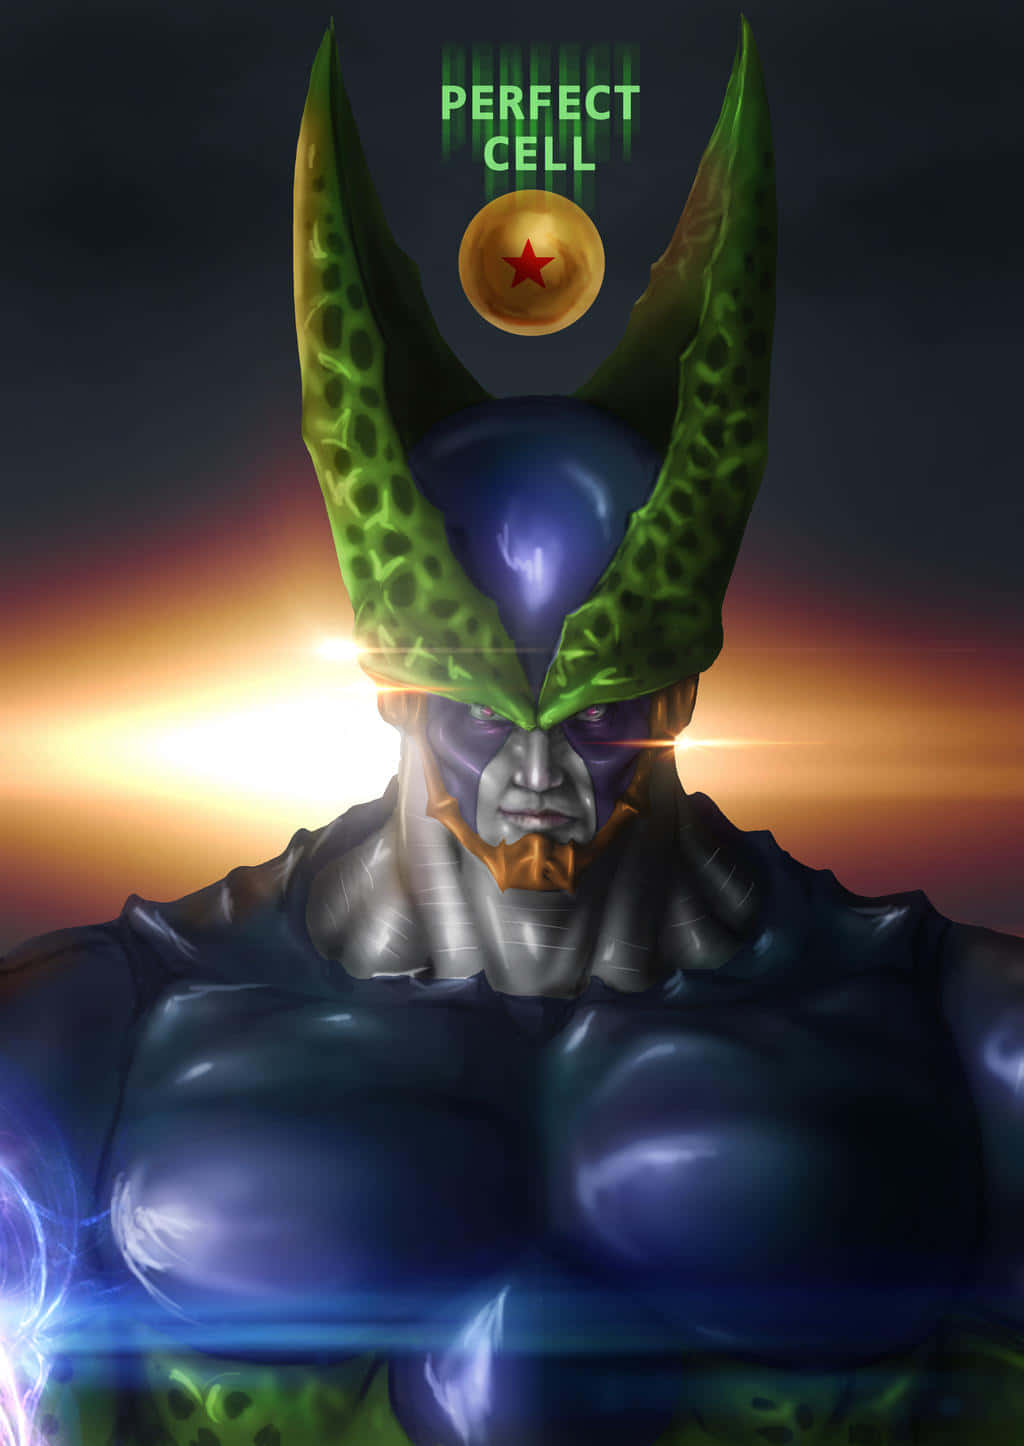 Perfect Cell, the gruesome and powerful villain of the anime series Dragon Ball Z Wallpaper